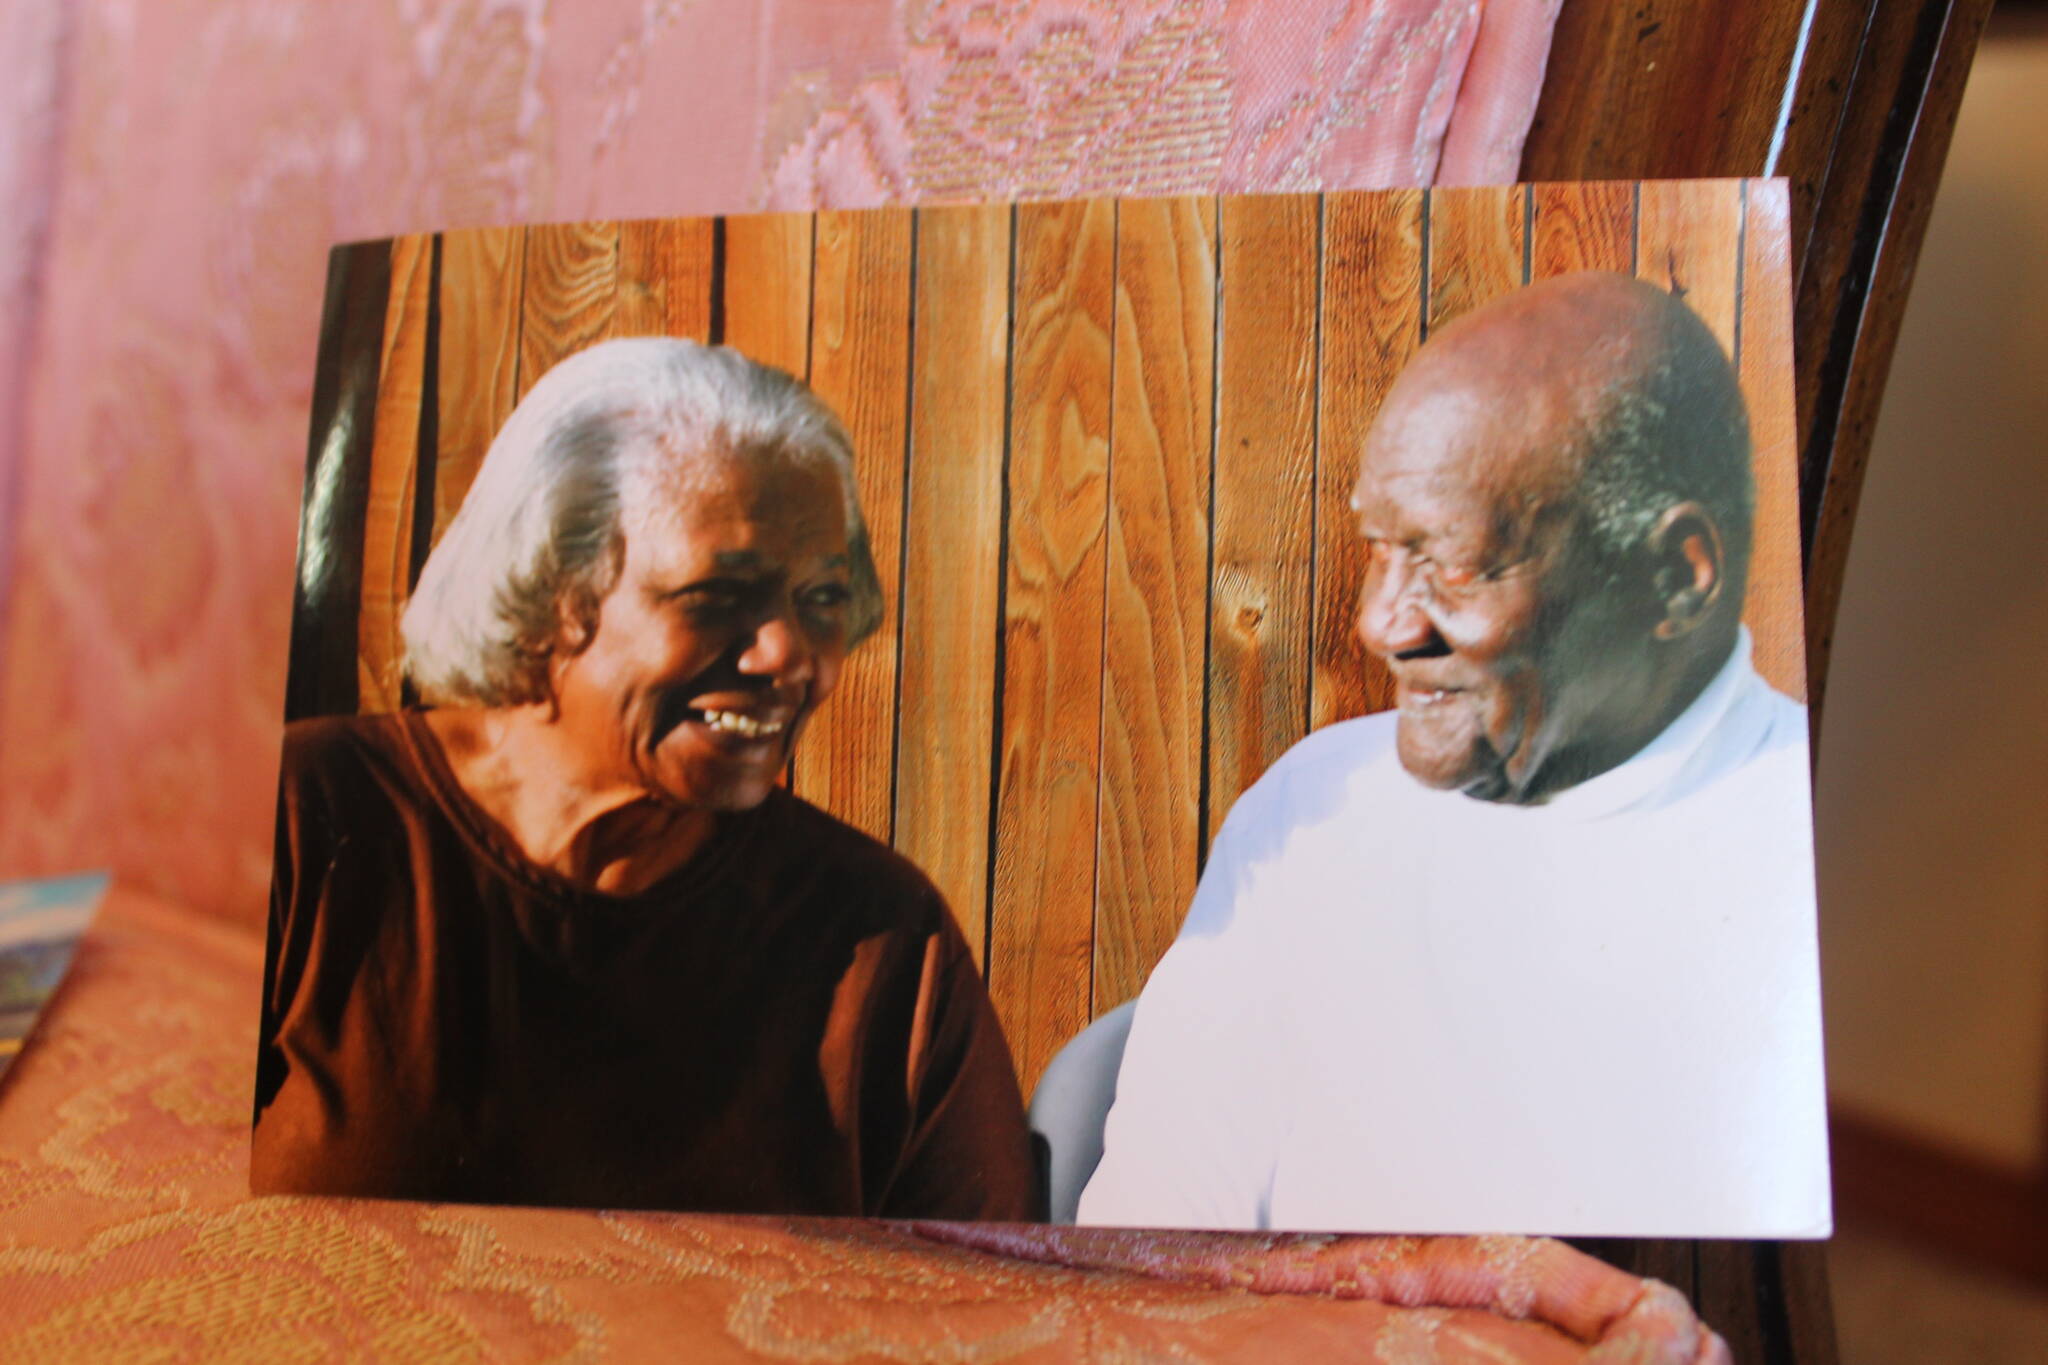 Leona and her husband Clarence spent eight decades together, with three years of courting and 77 years of marriage. Photo by Bailey Jo Josie/Sound Publishing.